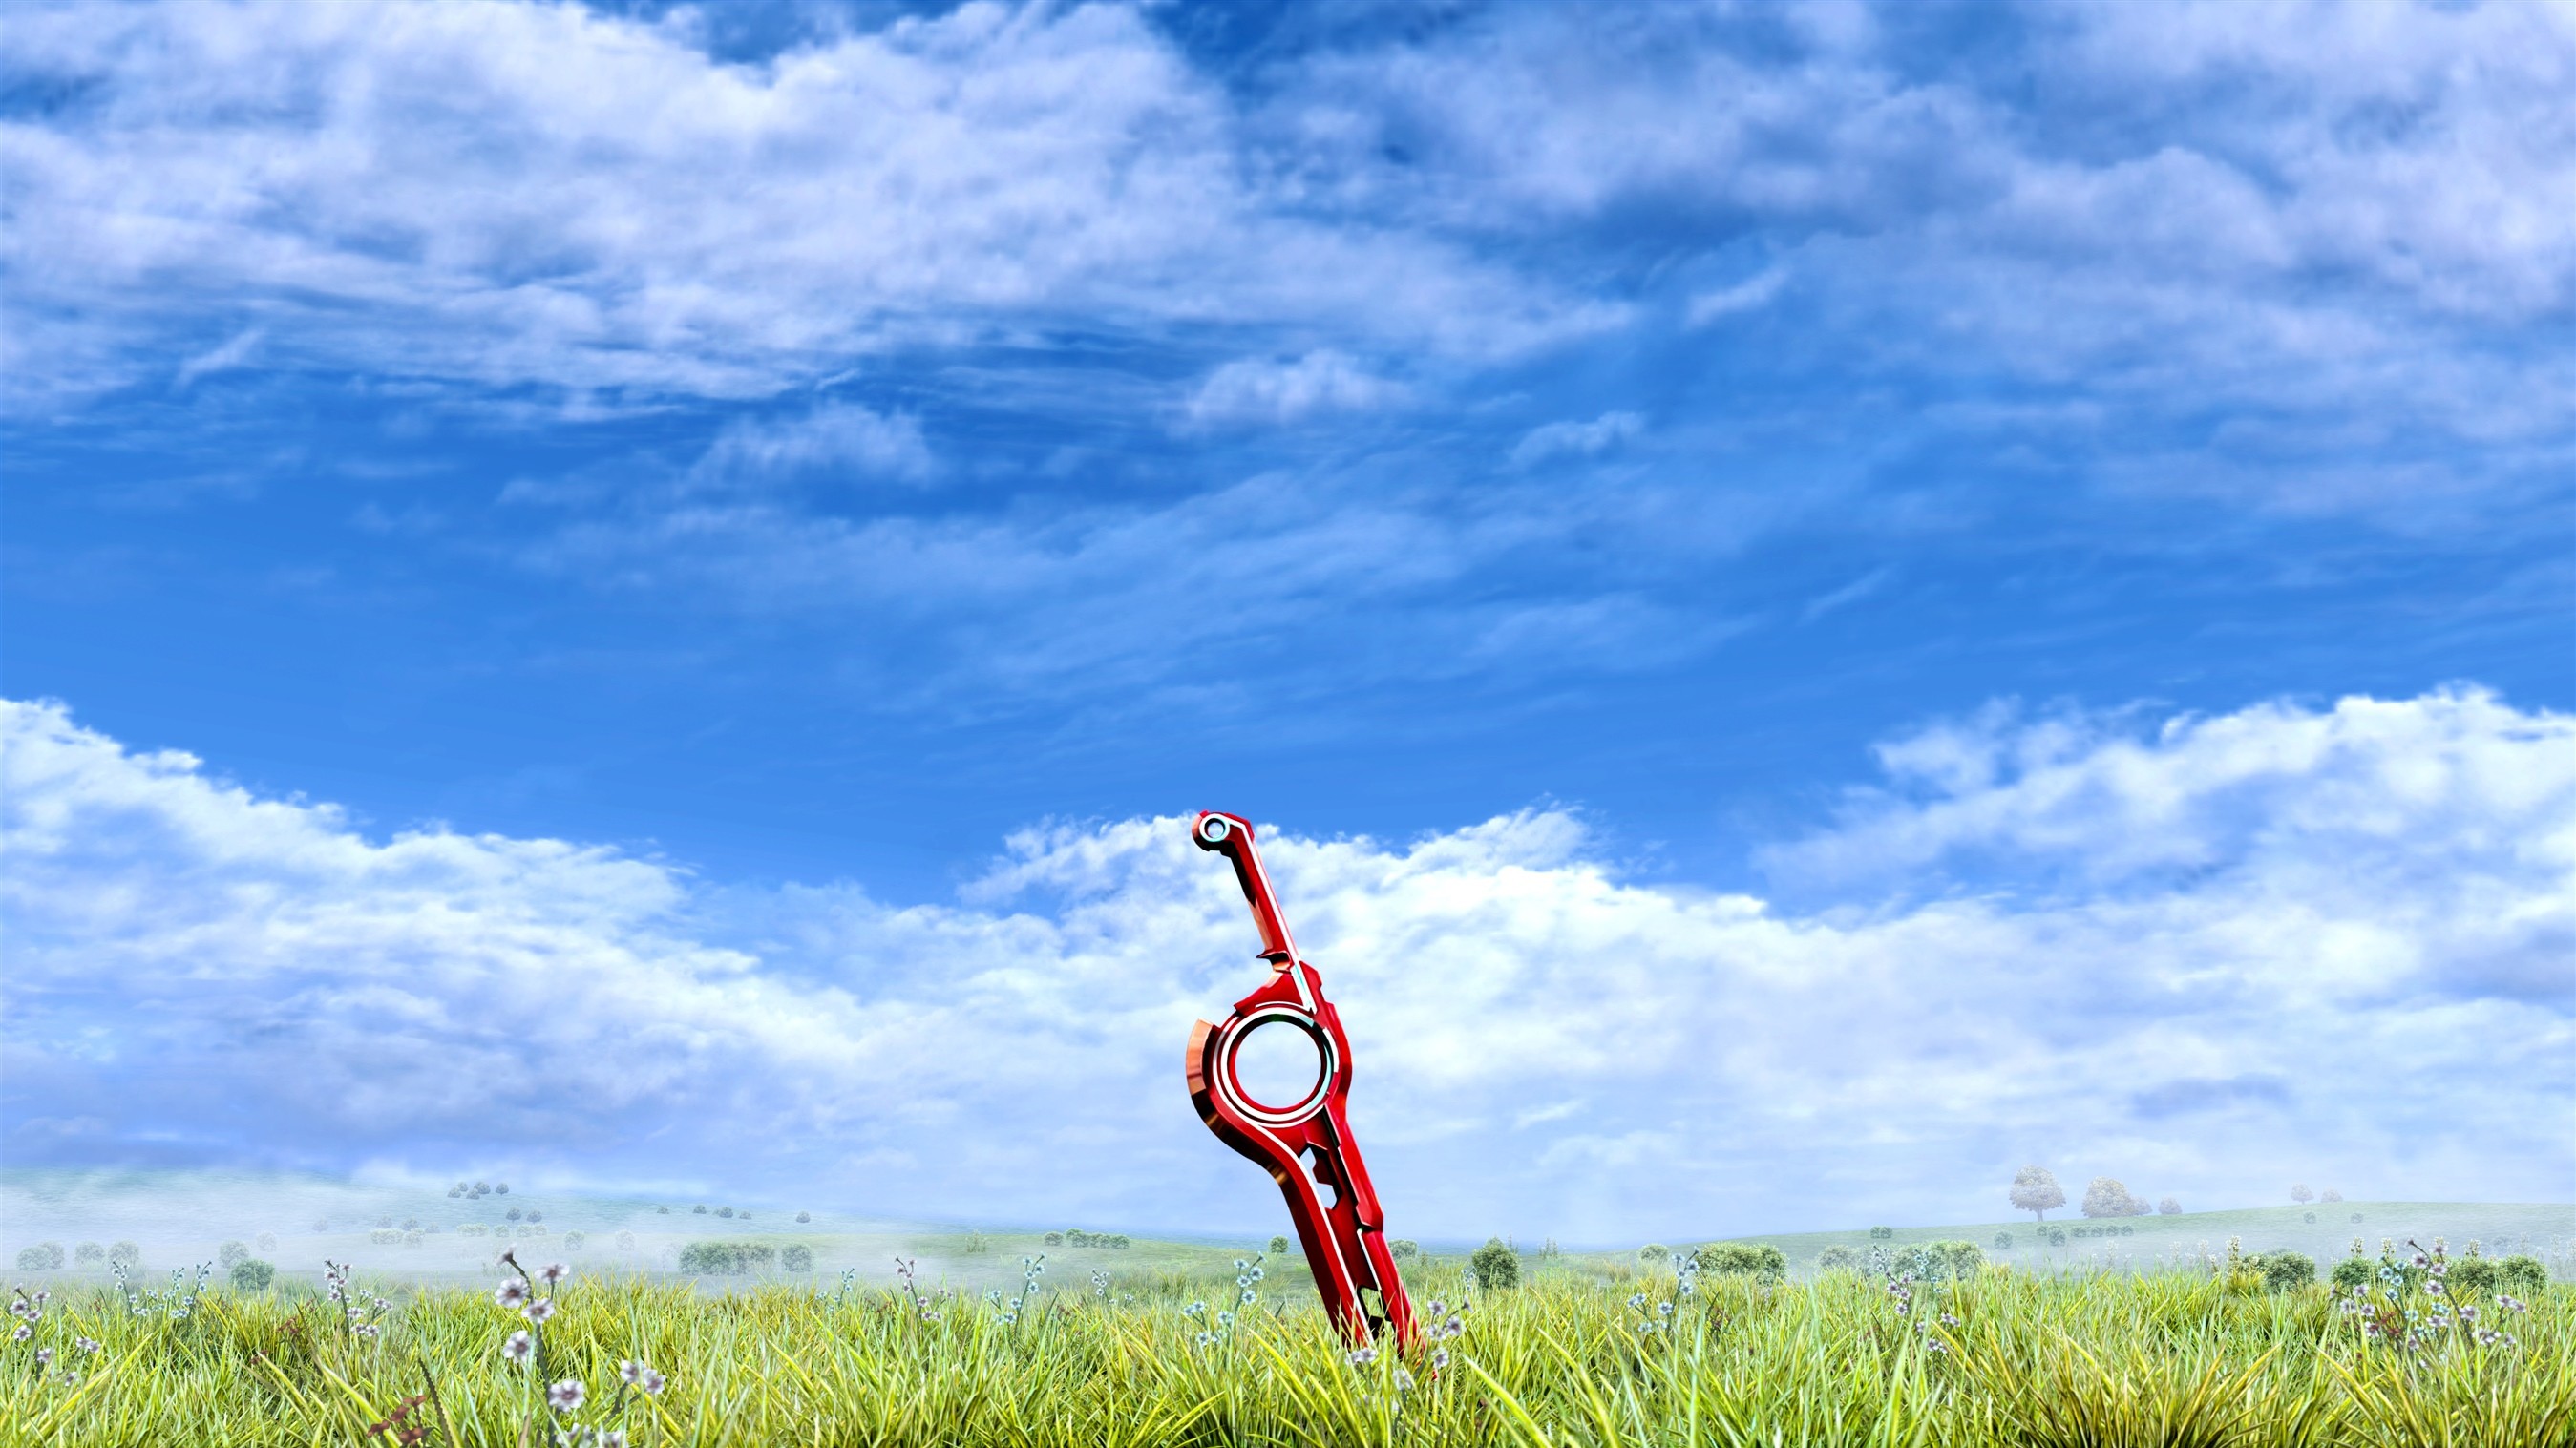 xenoblade chronicles wallpaper,people in nature,sky,grassland,natural environment,grass